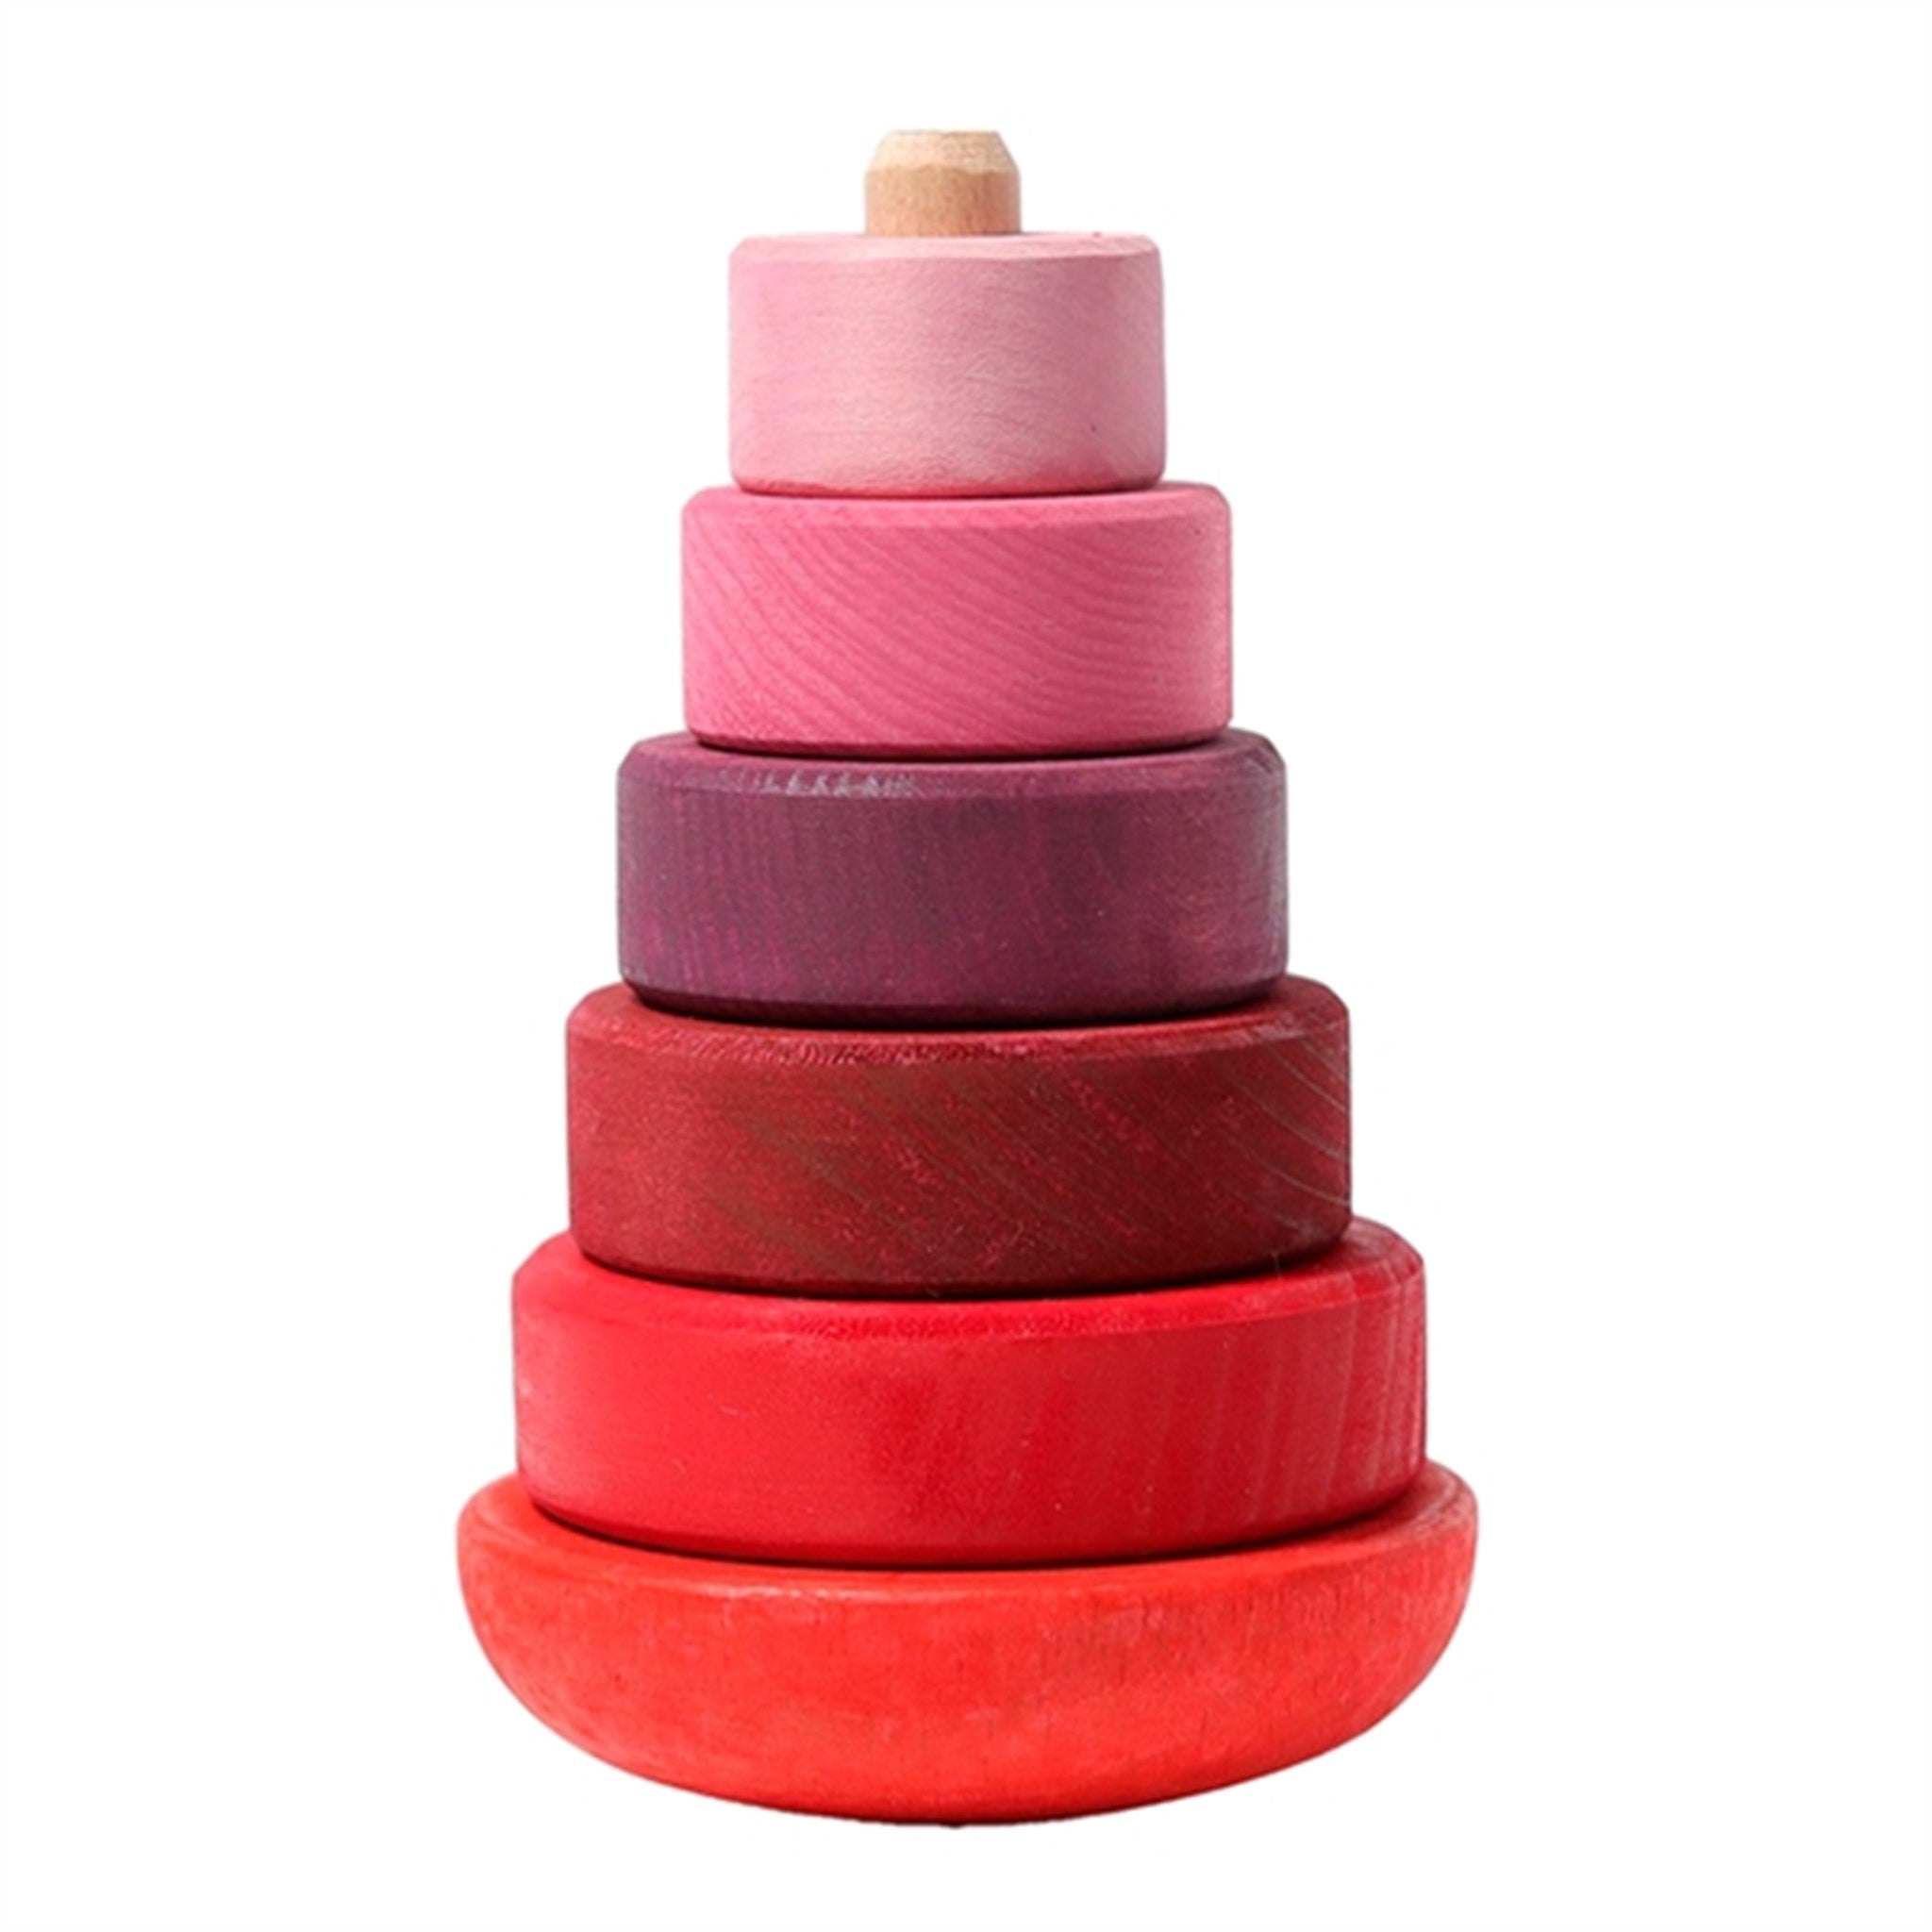 GRIMM´S Stacking TowerPink Wobbly